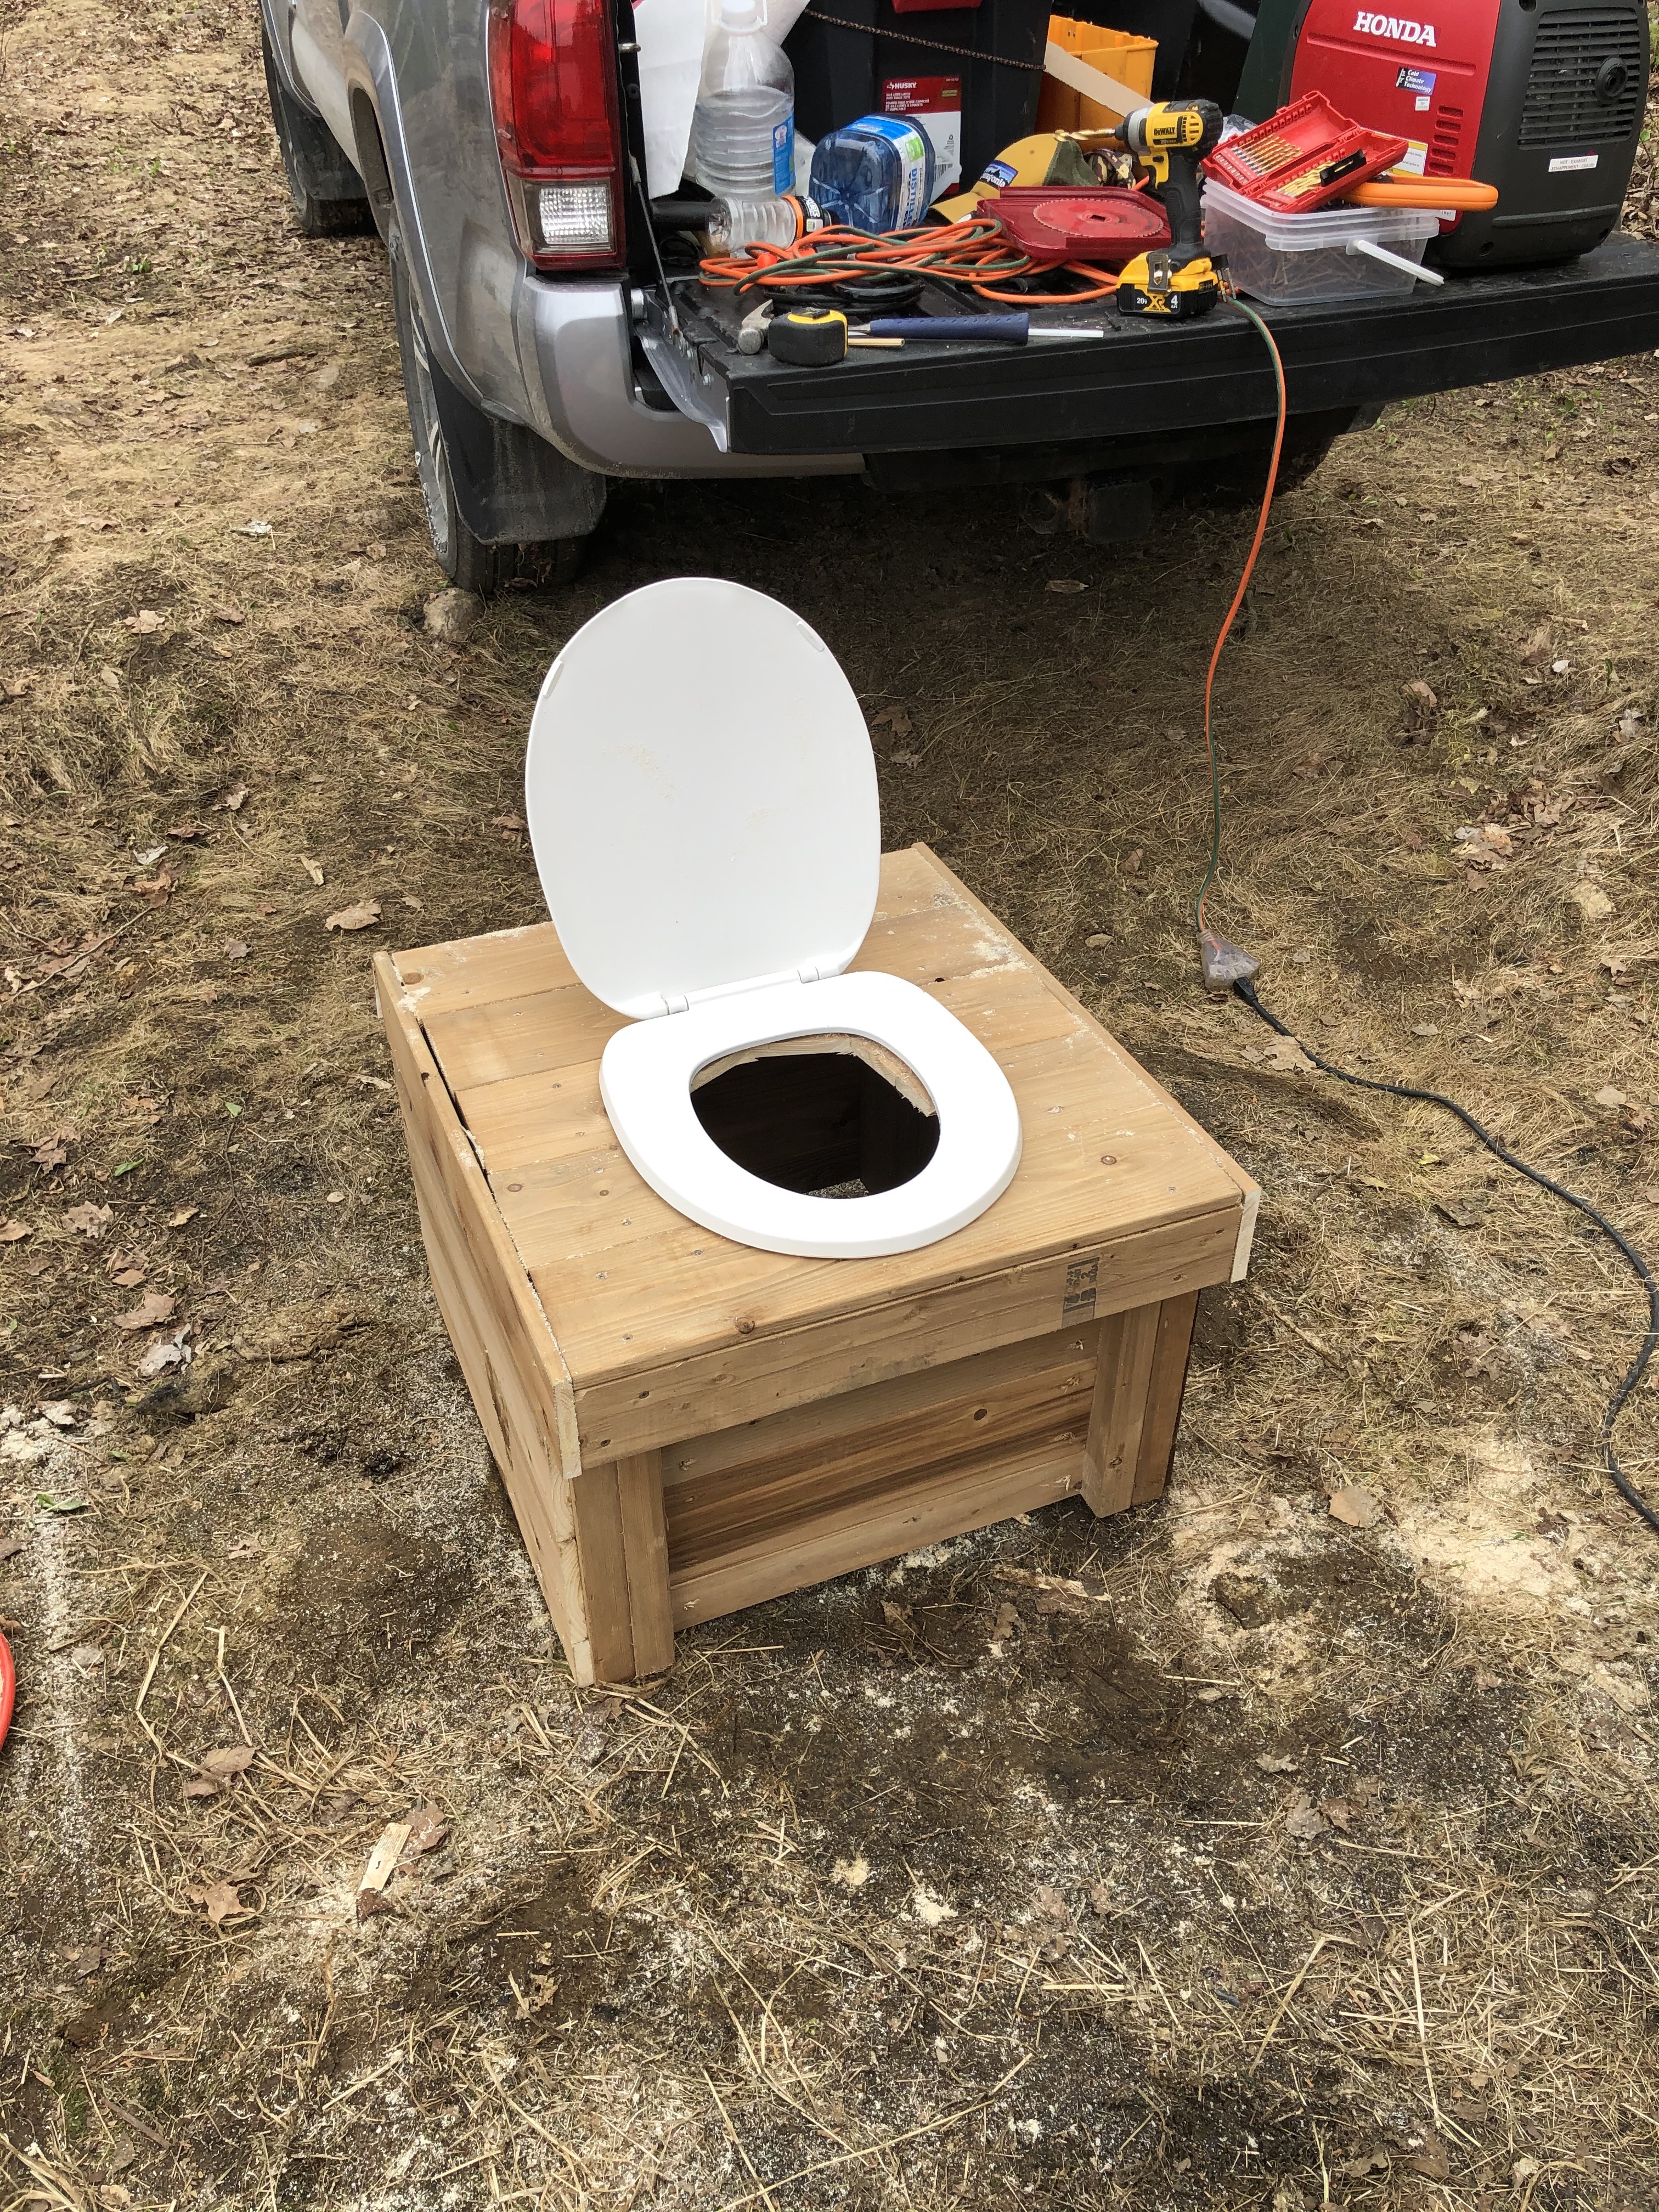 A thunderbox, or a minimal outhouse, consisting of a wooden box with a hole cut to put a toilet seat on